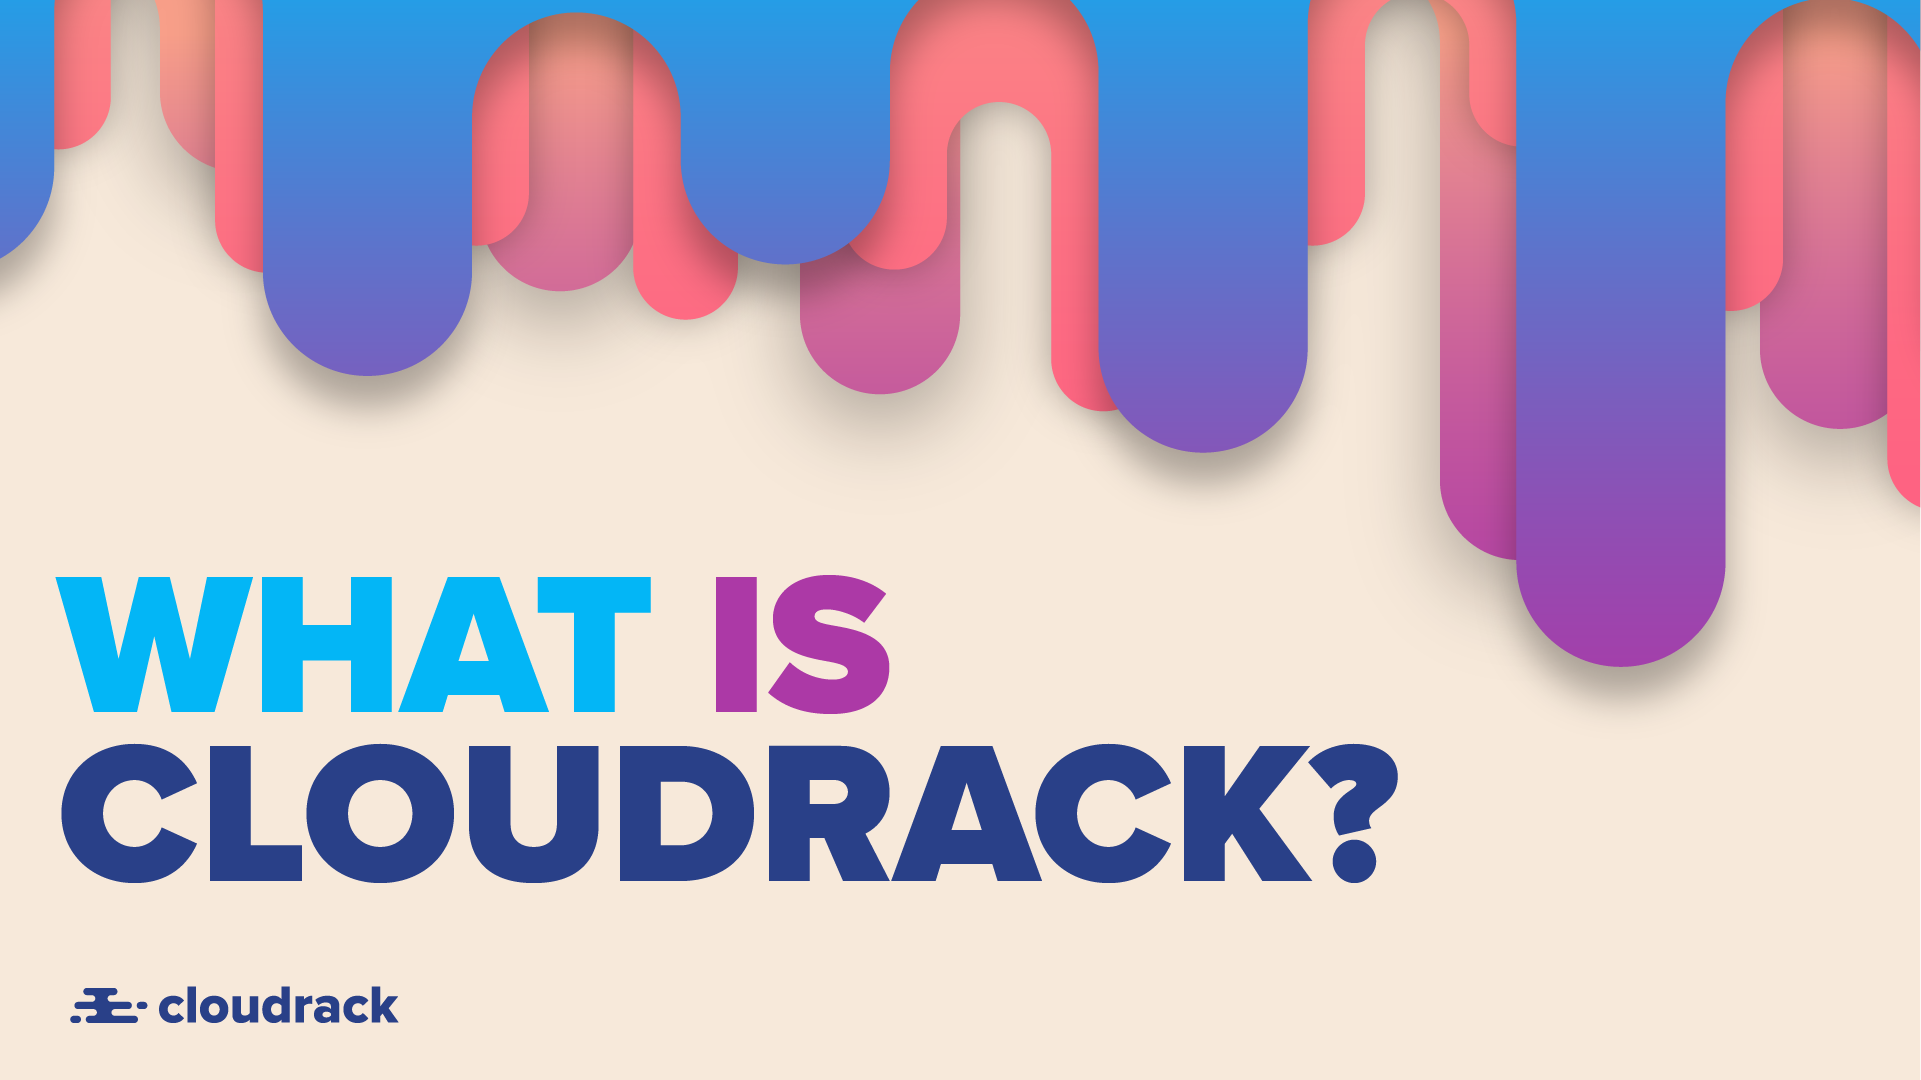 What is Cloudrack?